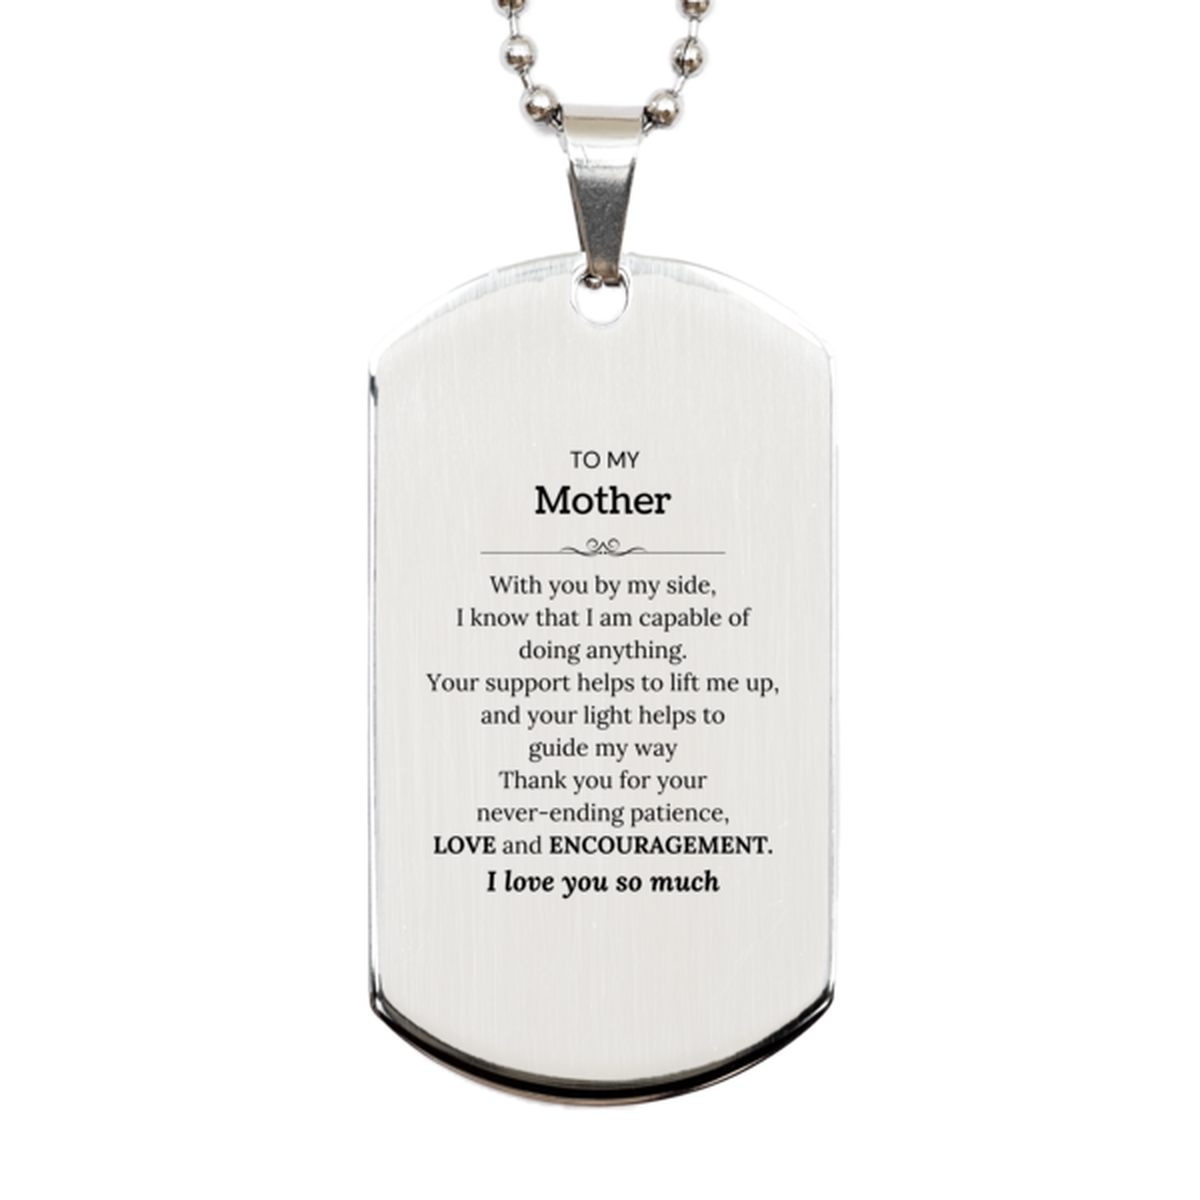 Appreciation Mother Silver Dog Tag Gifts, To My Mother Birthday Christmas Wedding Keepsake Gifts for Mother With you by my side, I know that I am capable of doing anything. I love you so much